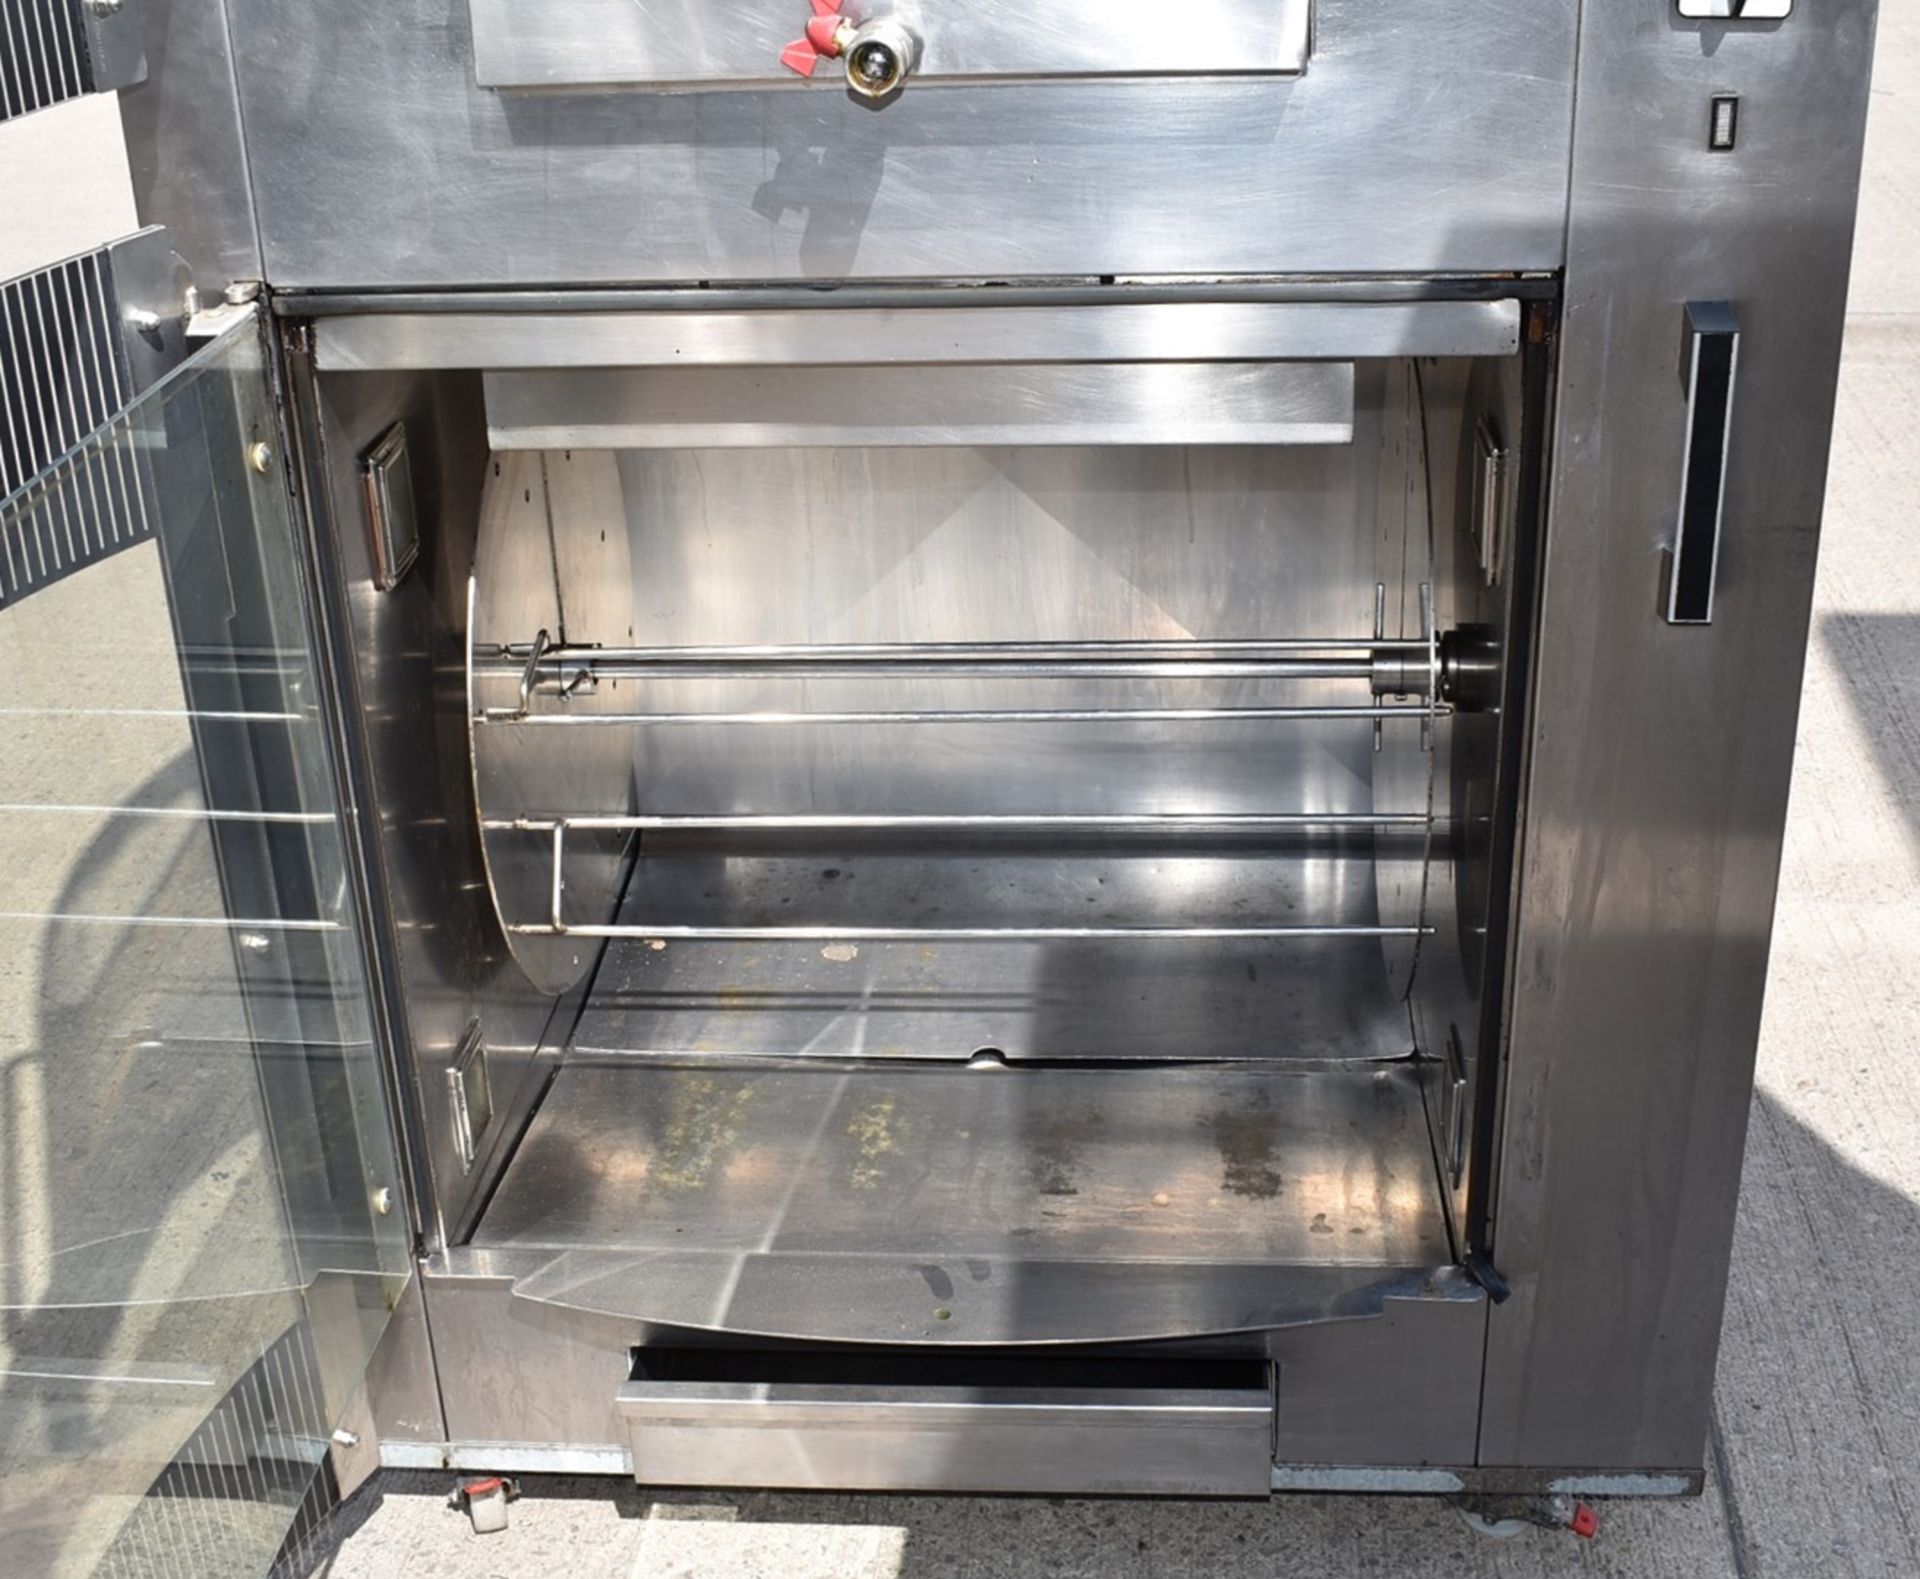 1 x BKI BBQ King Commercial Double Rotisserie Chicken Oven With Stand - Type VGUK16 - 3 Phase - Image 4 of 21